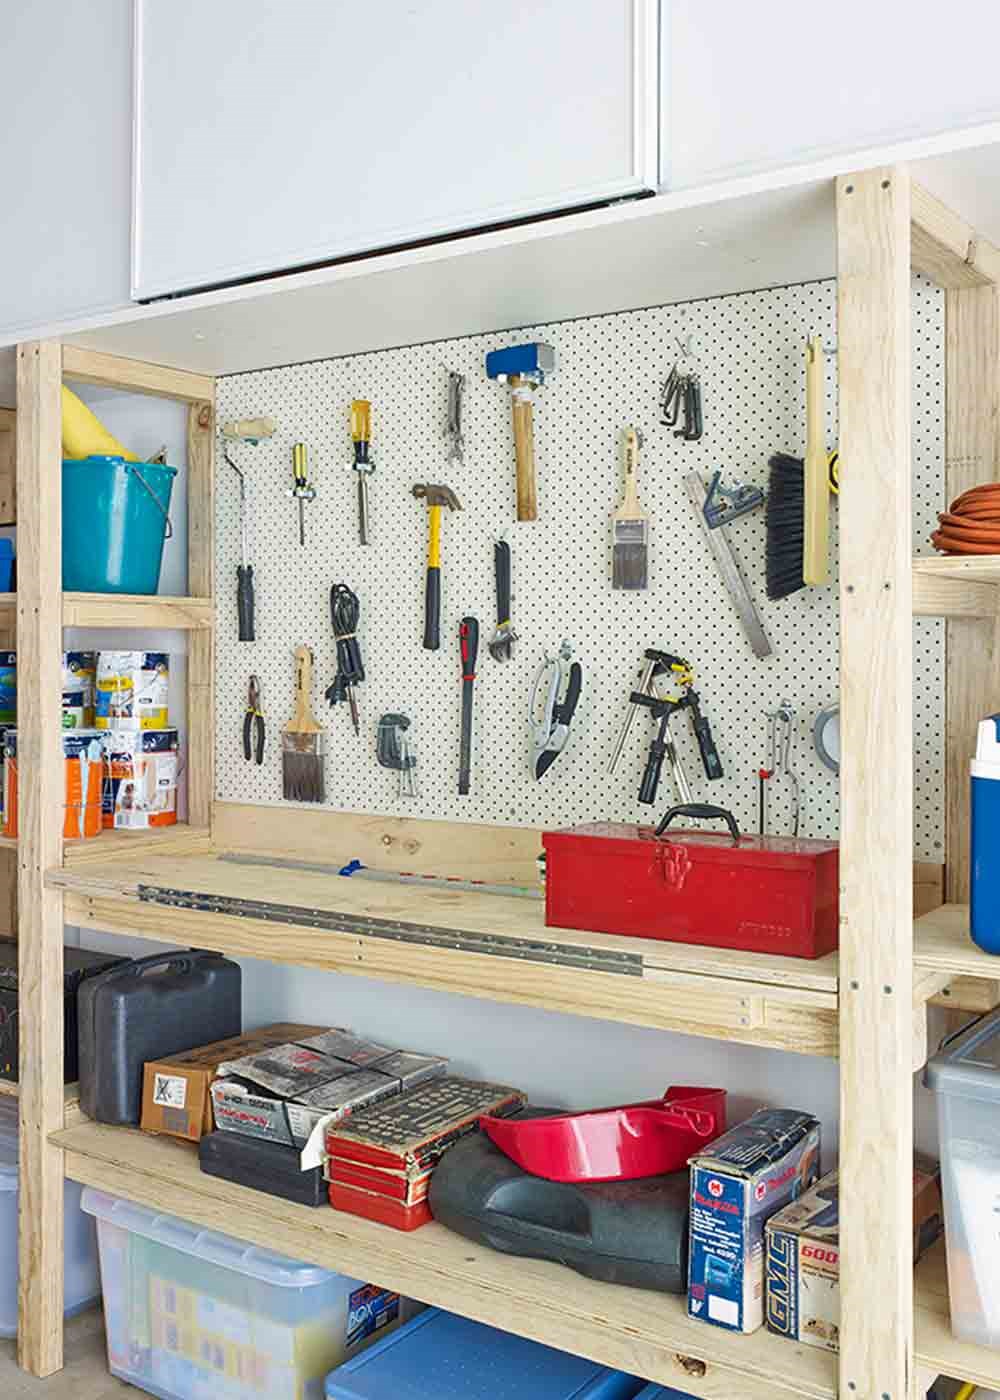 How to turn your garage from junkyard to storage central | Better Homes ...